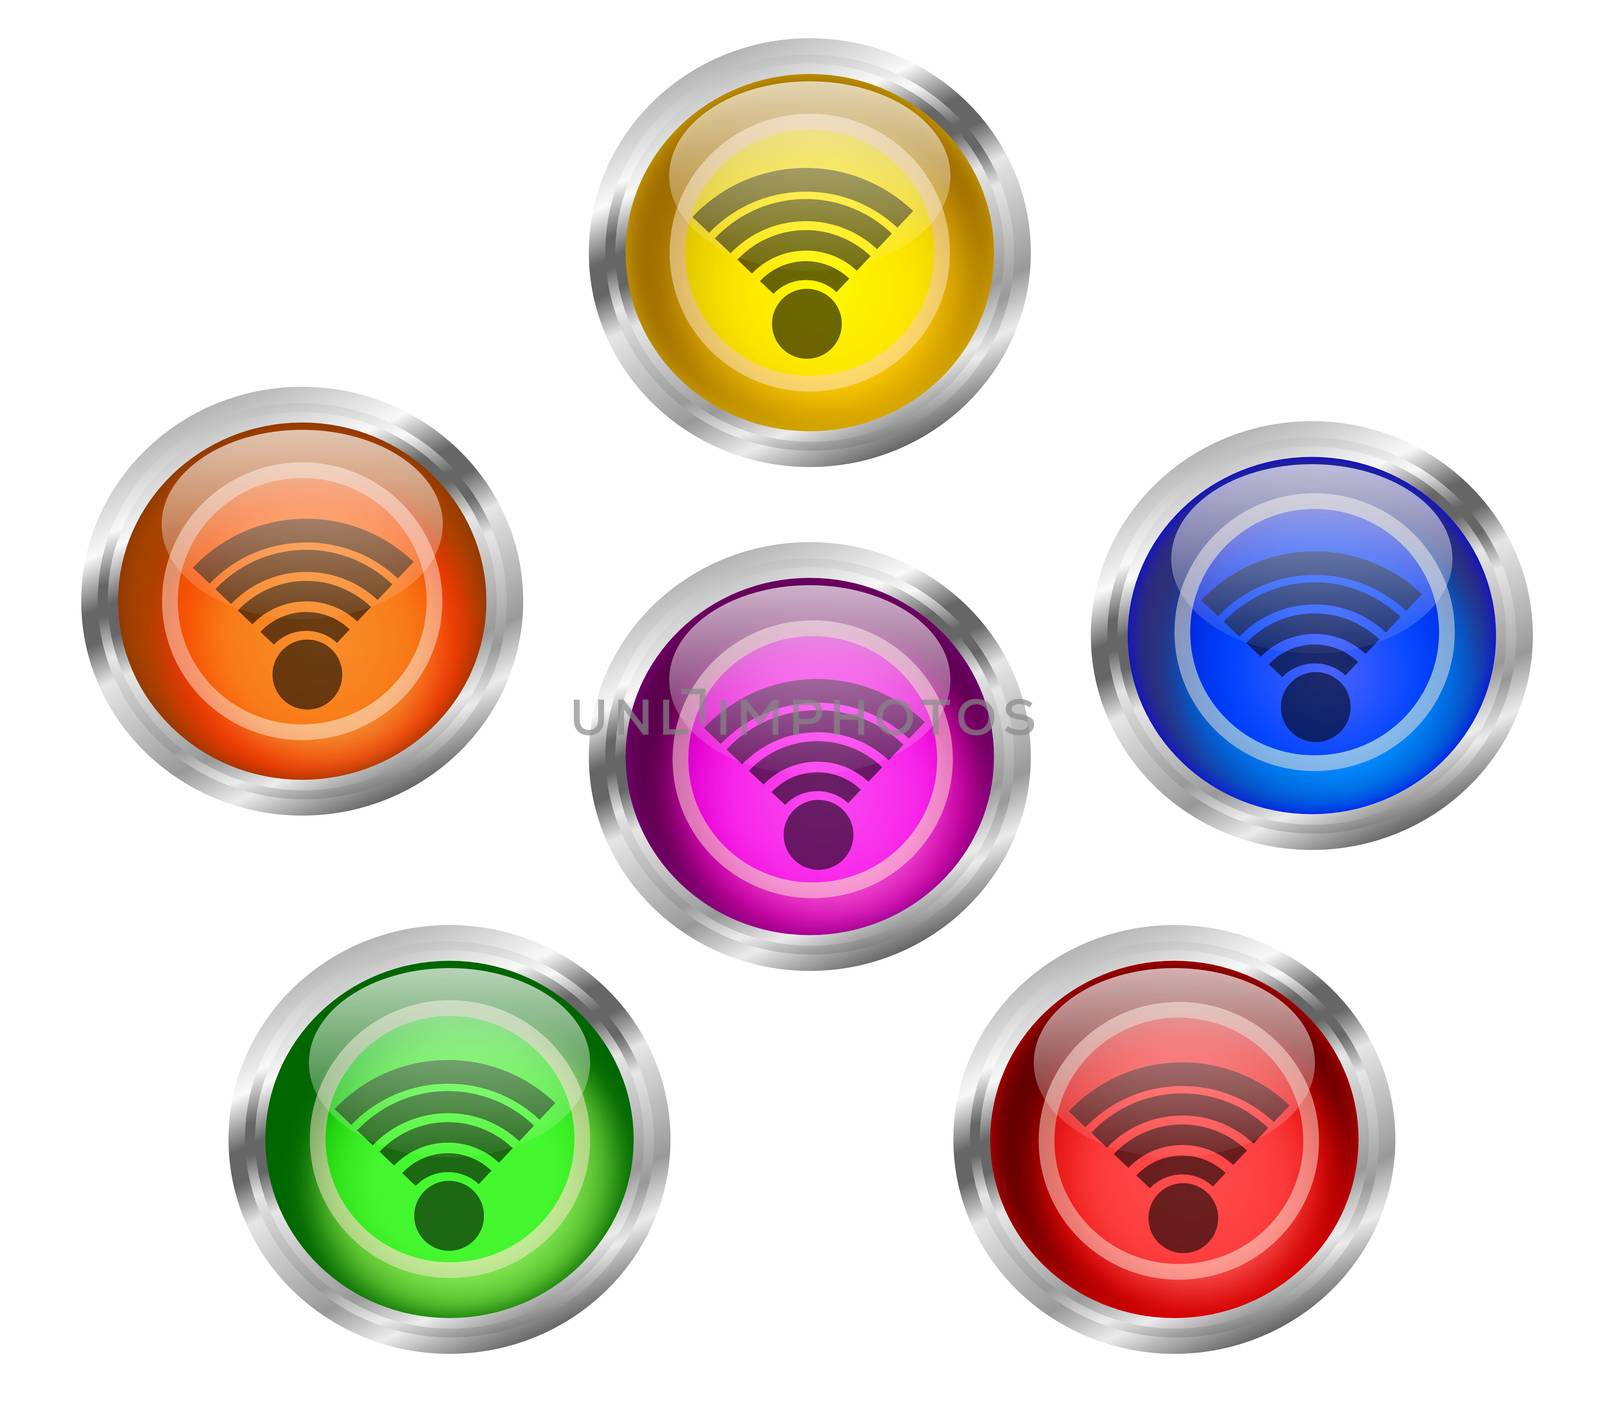 Set of shiny WIFI wireless internet connectivity round web icon buttons in six different colors - yellow, orange, red, green, pink blue, with silver or chrome metallic rim.
